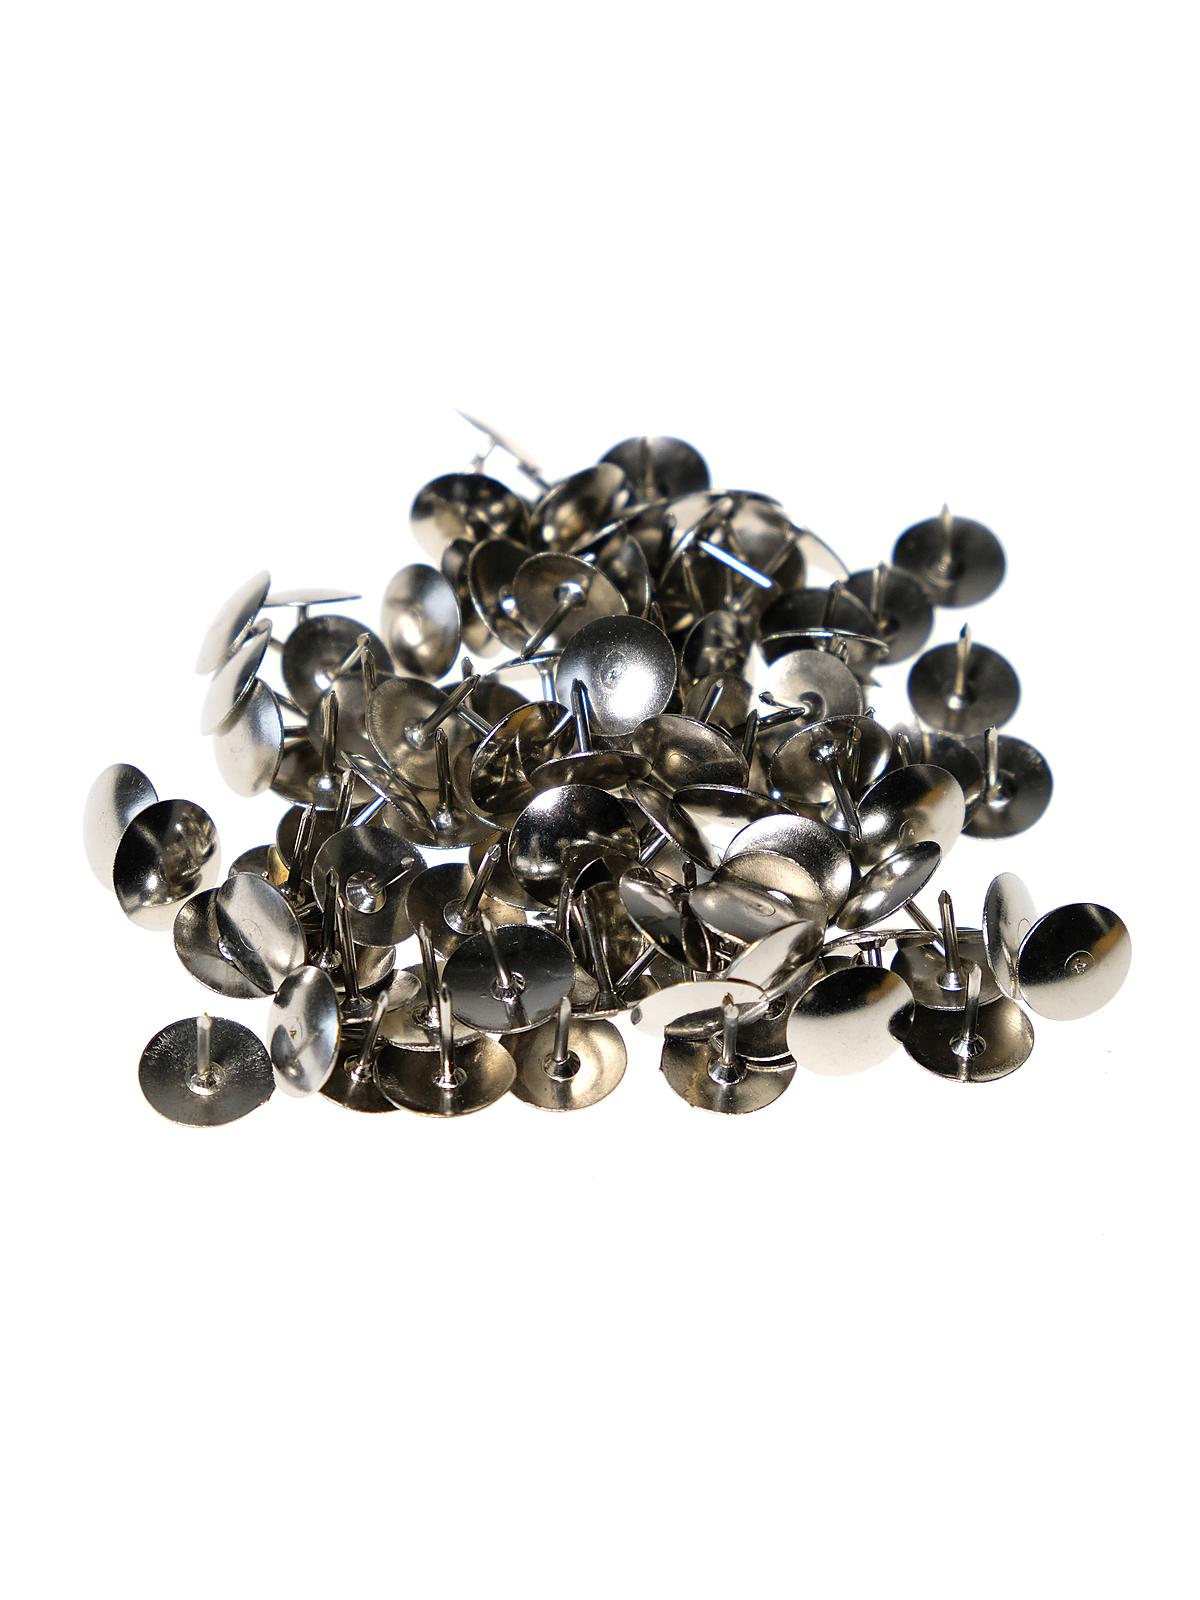 Thumb Tacks 7 16 In. Nickel Plated Pack Of 100